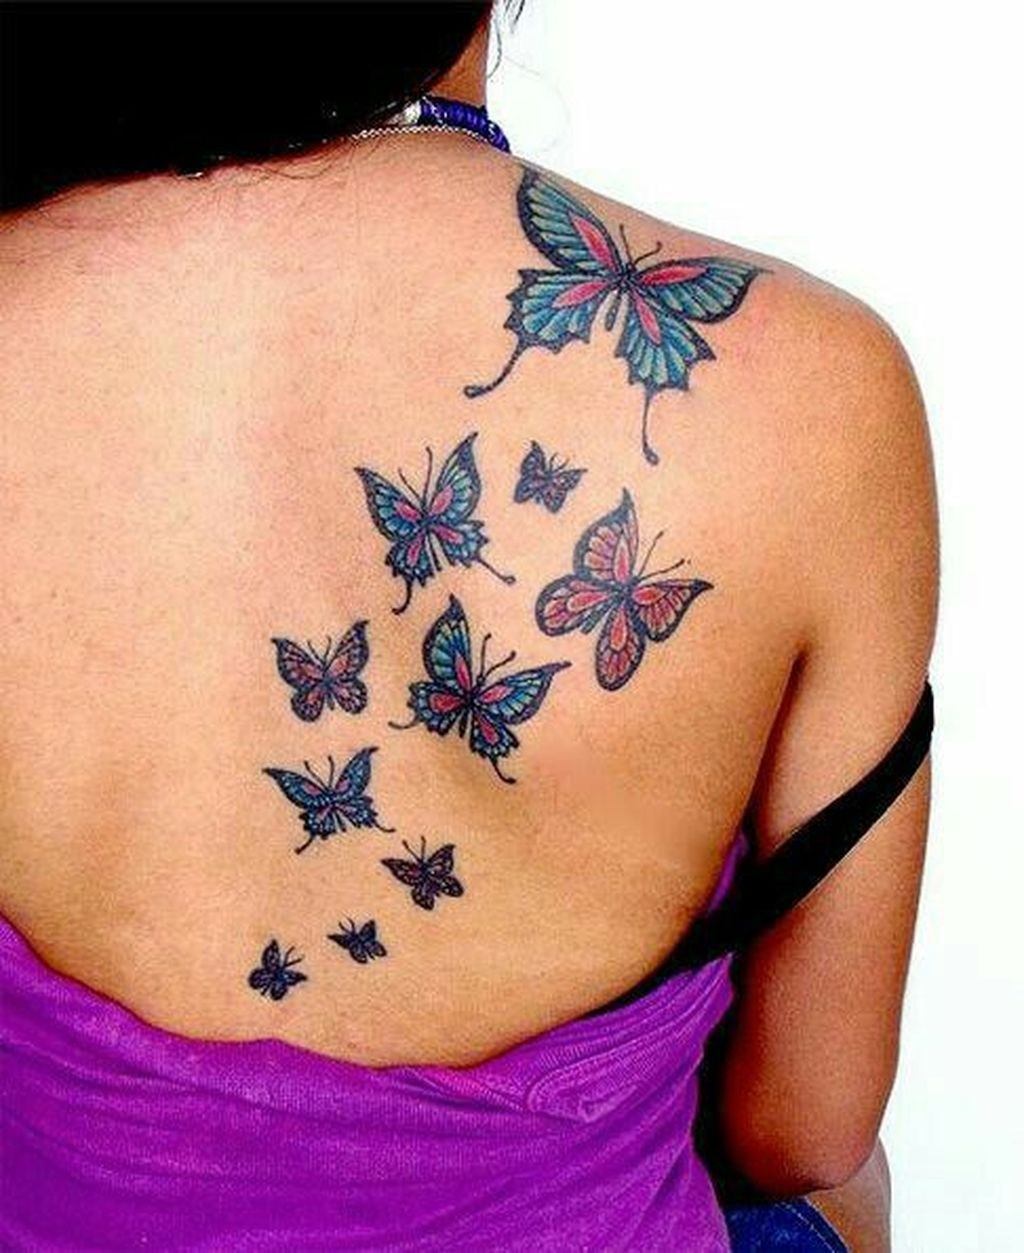 Colorful butterflies on girl’s back tattoo